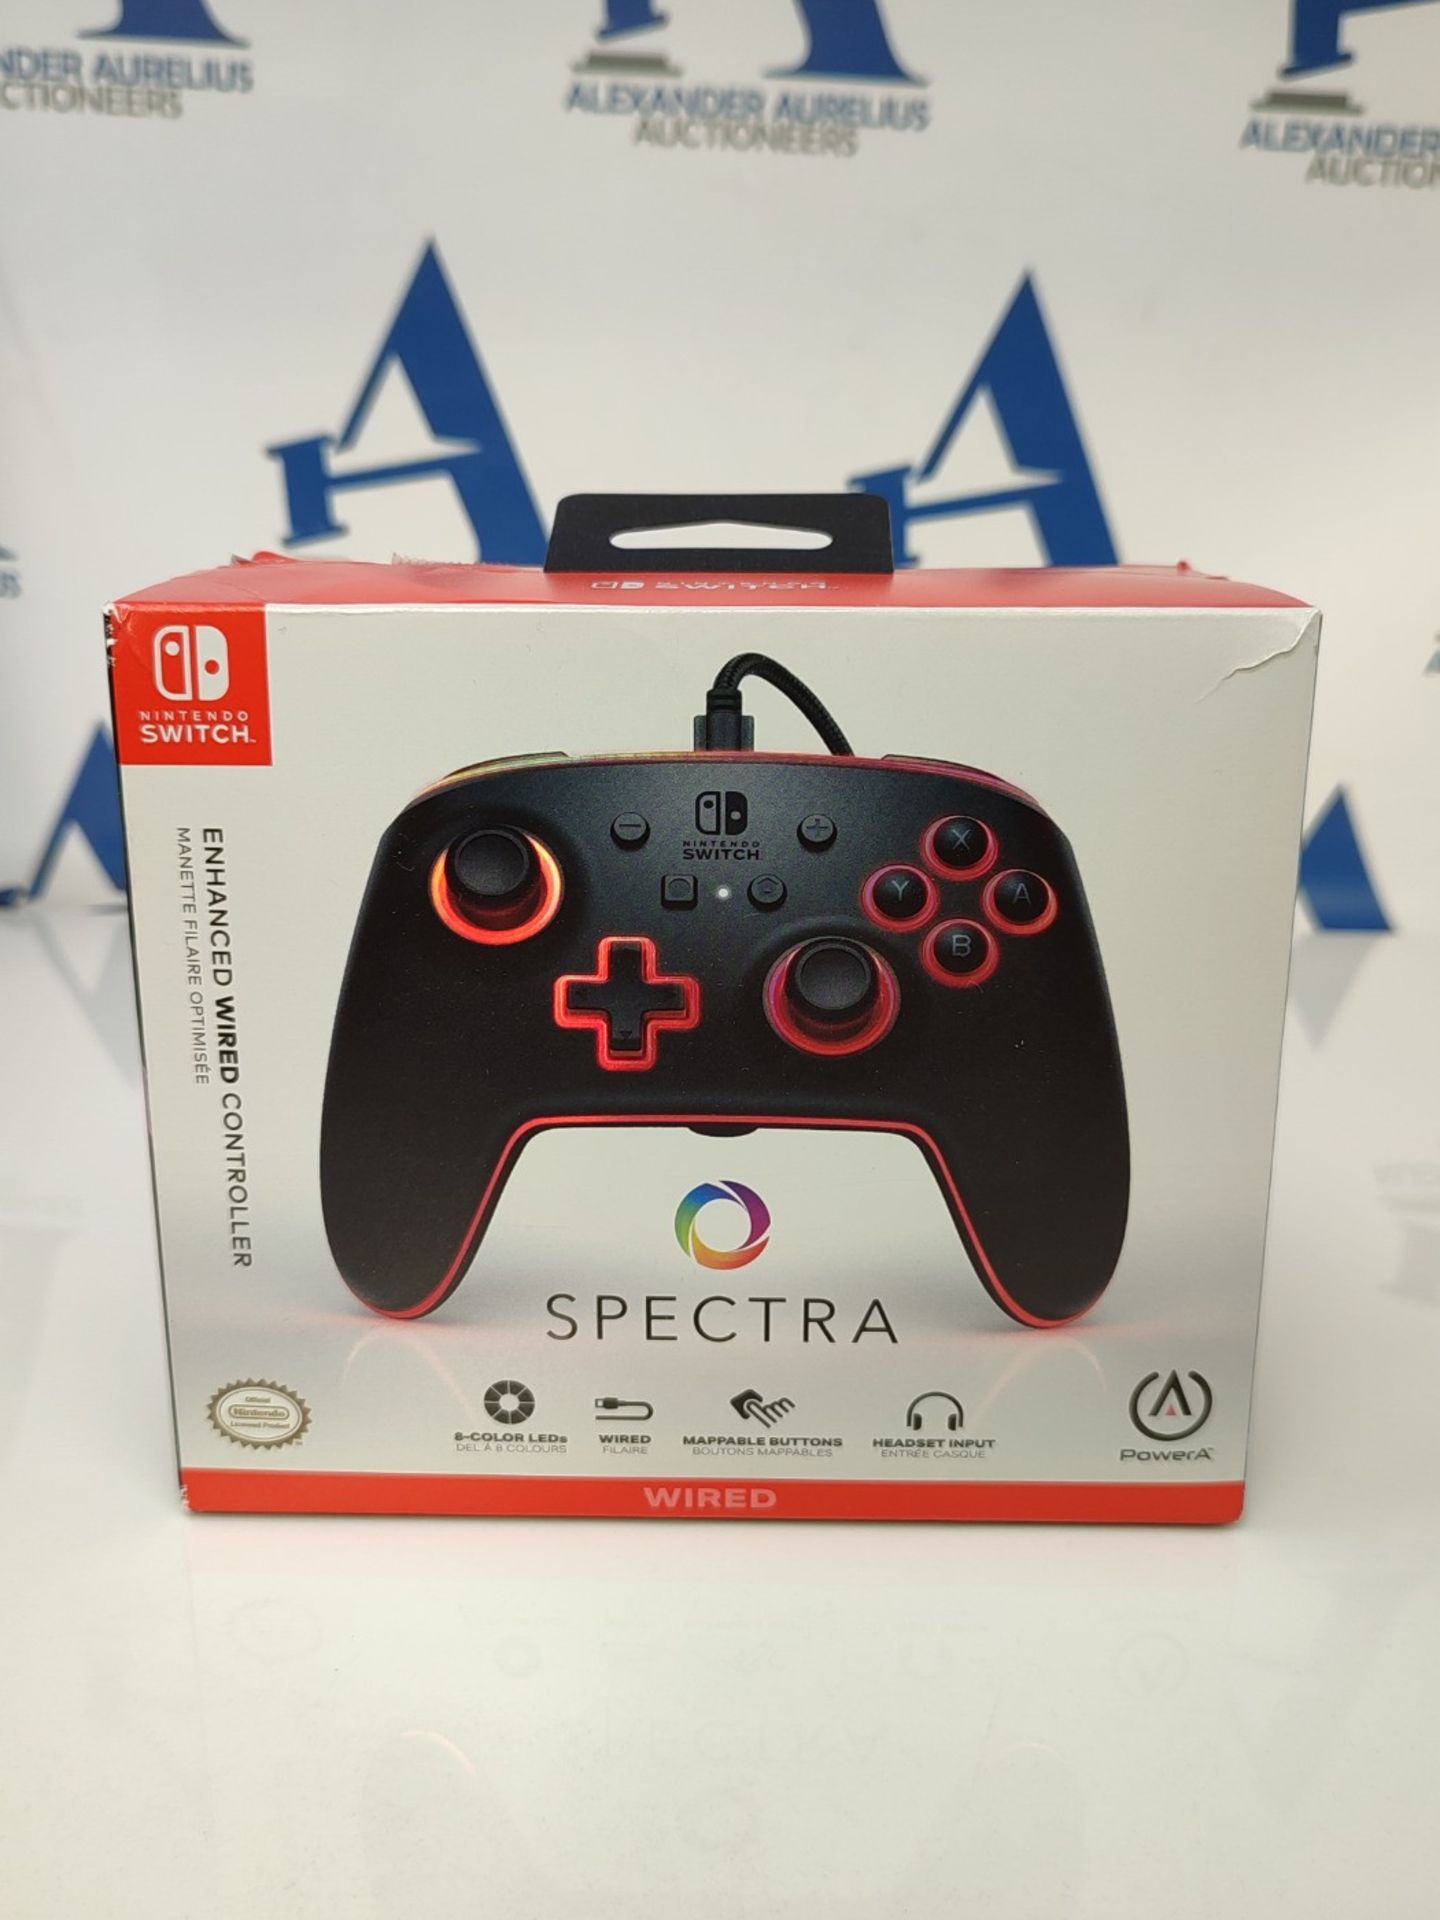 PowerA Advanced Wired Controller Spectra for Nintendo Switch - Nintendo Switch - Image 5 of 6